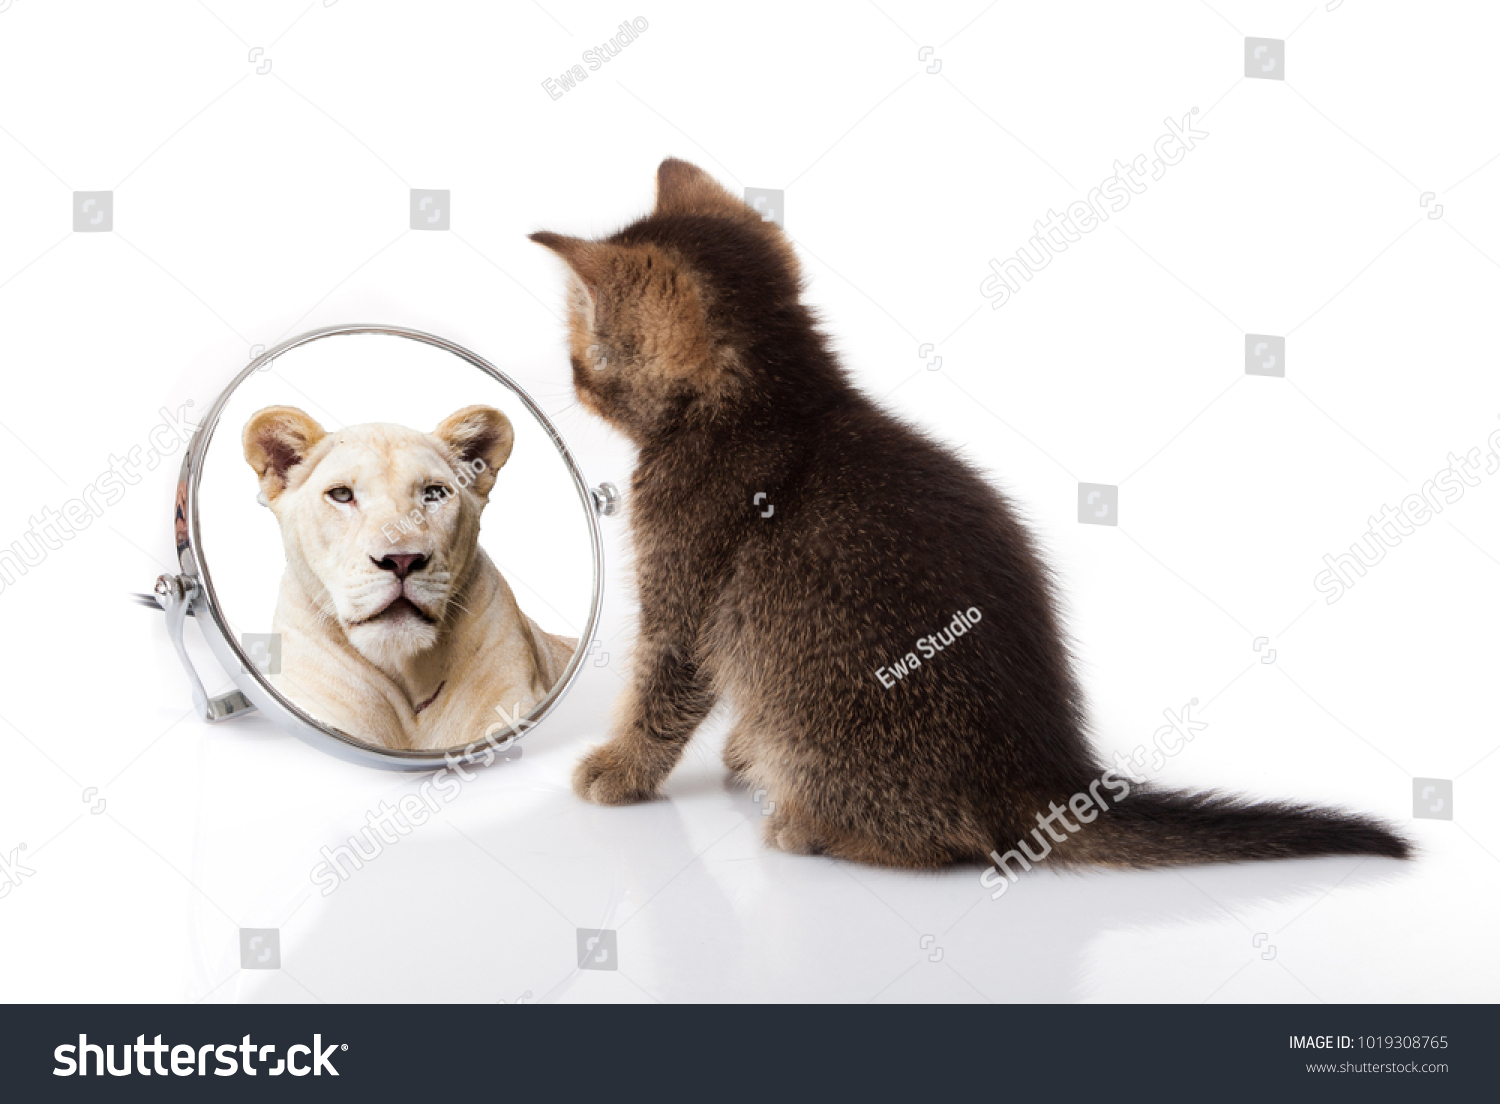 stock-photo-kitten-with-mirror-on-white-background-kitten-looks-in-a-mirror-reflection-of-a-lion-1019308765.jpg